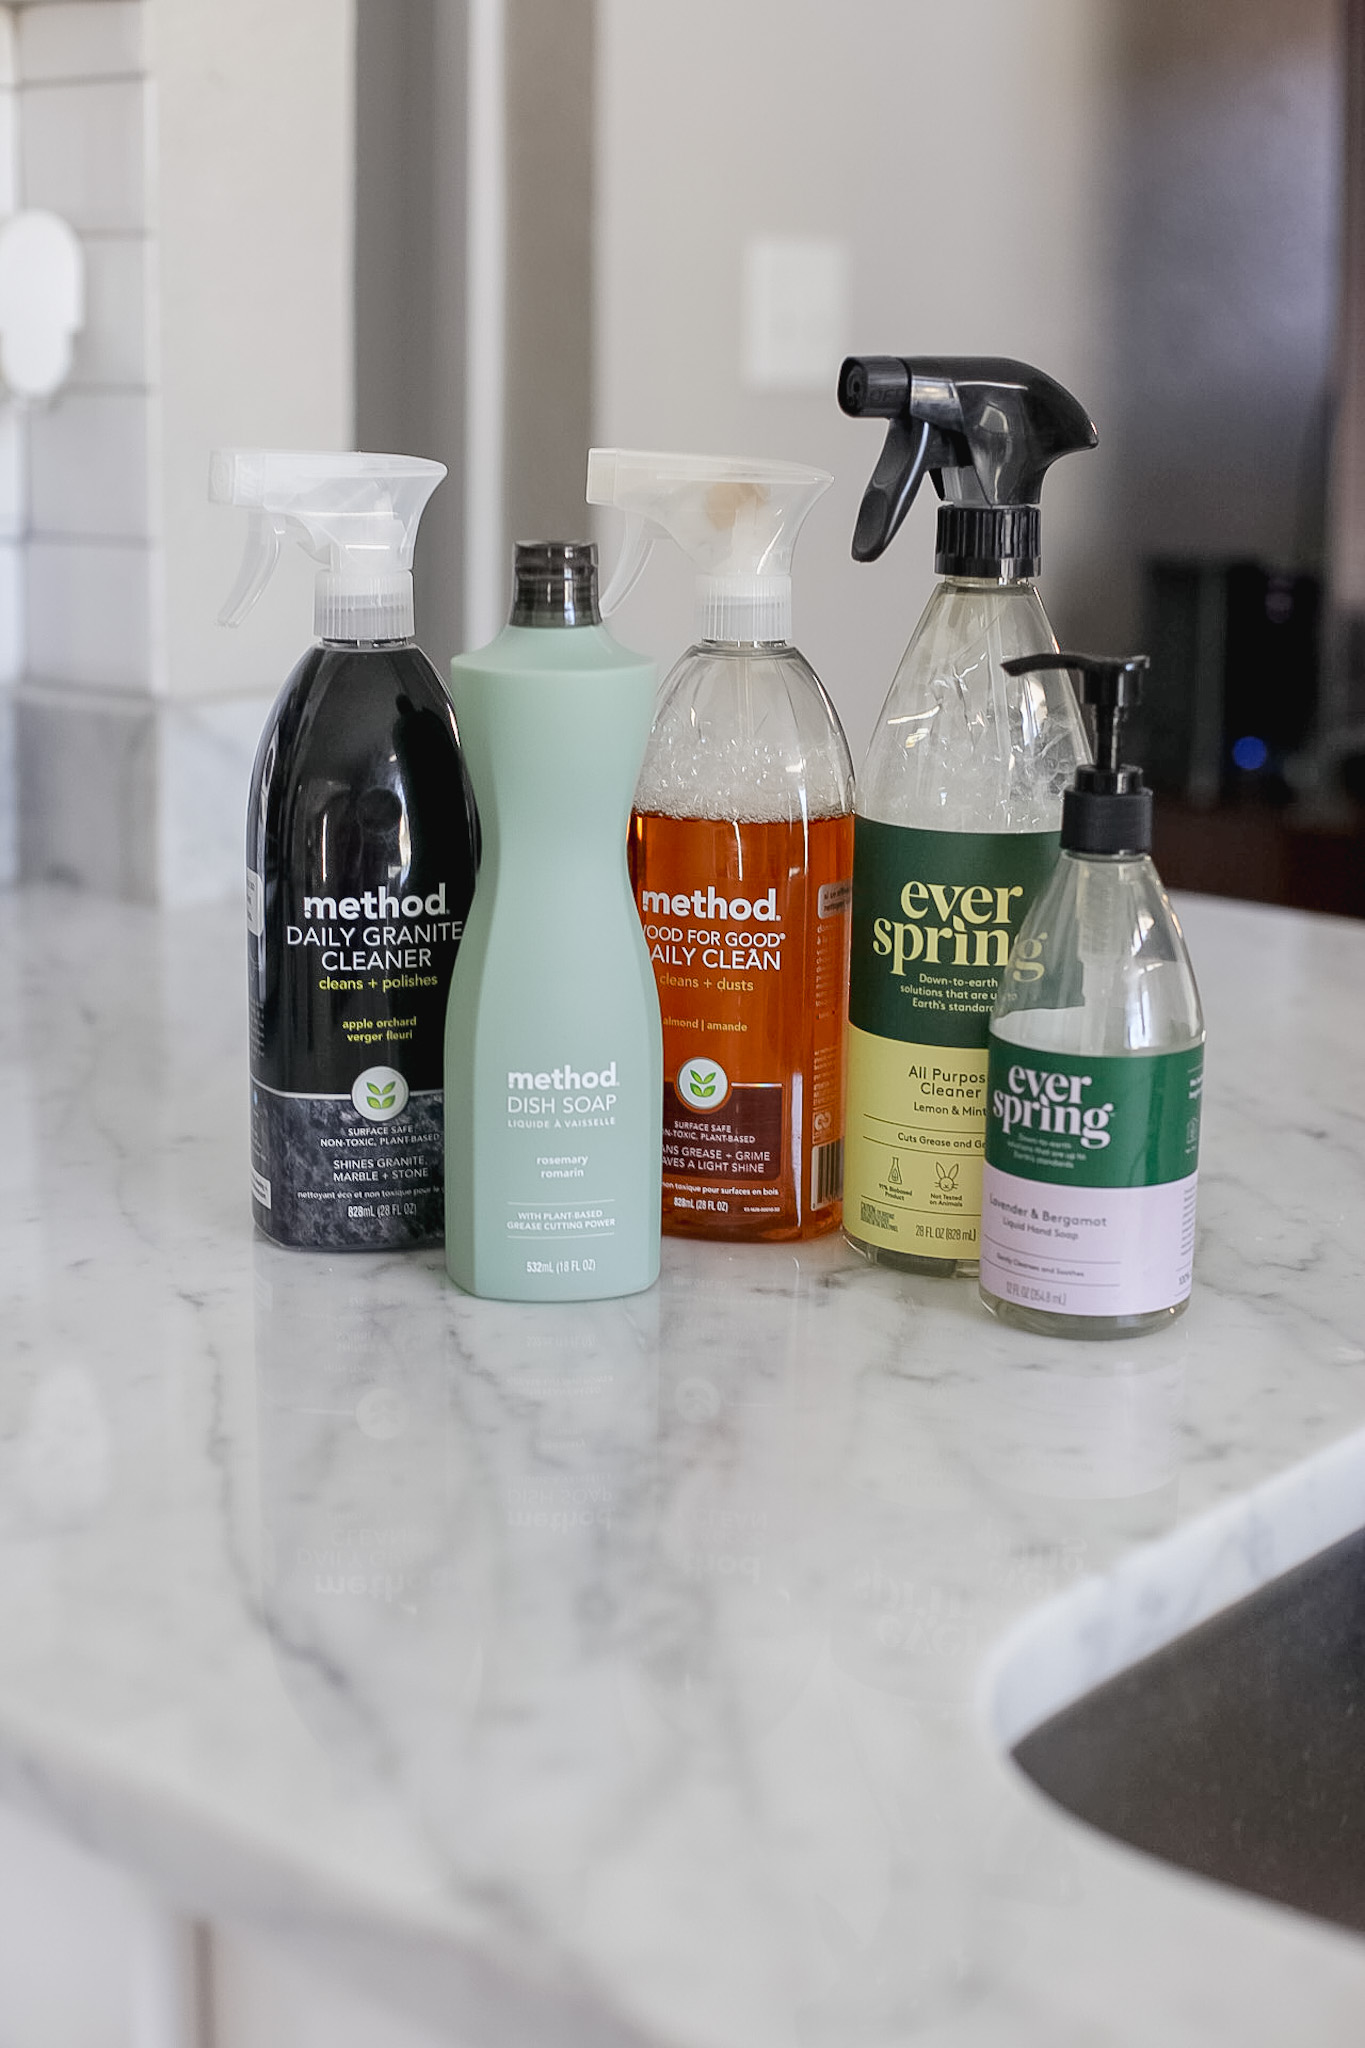 Method Liquid Dish Soap Rosemary | Method Daily Granite Cleaner | Free & Clear Foaming Hand Soap | Method Cleaning Products Wood for Good Polish